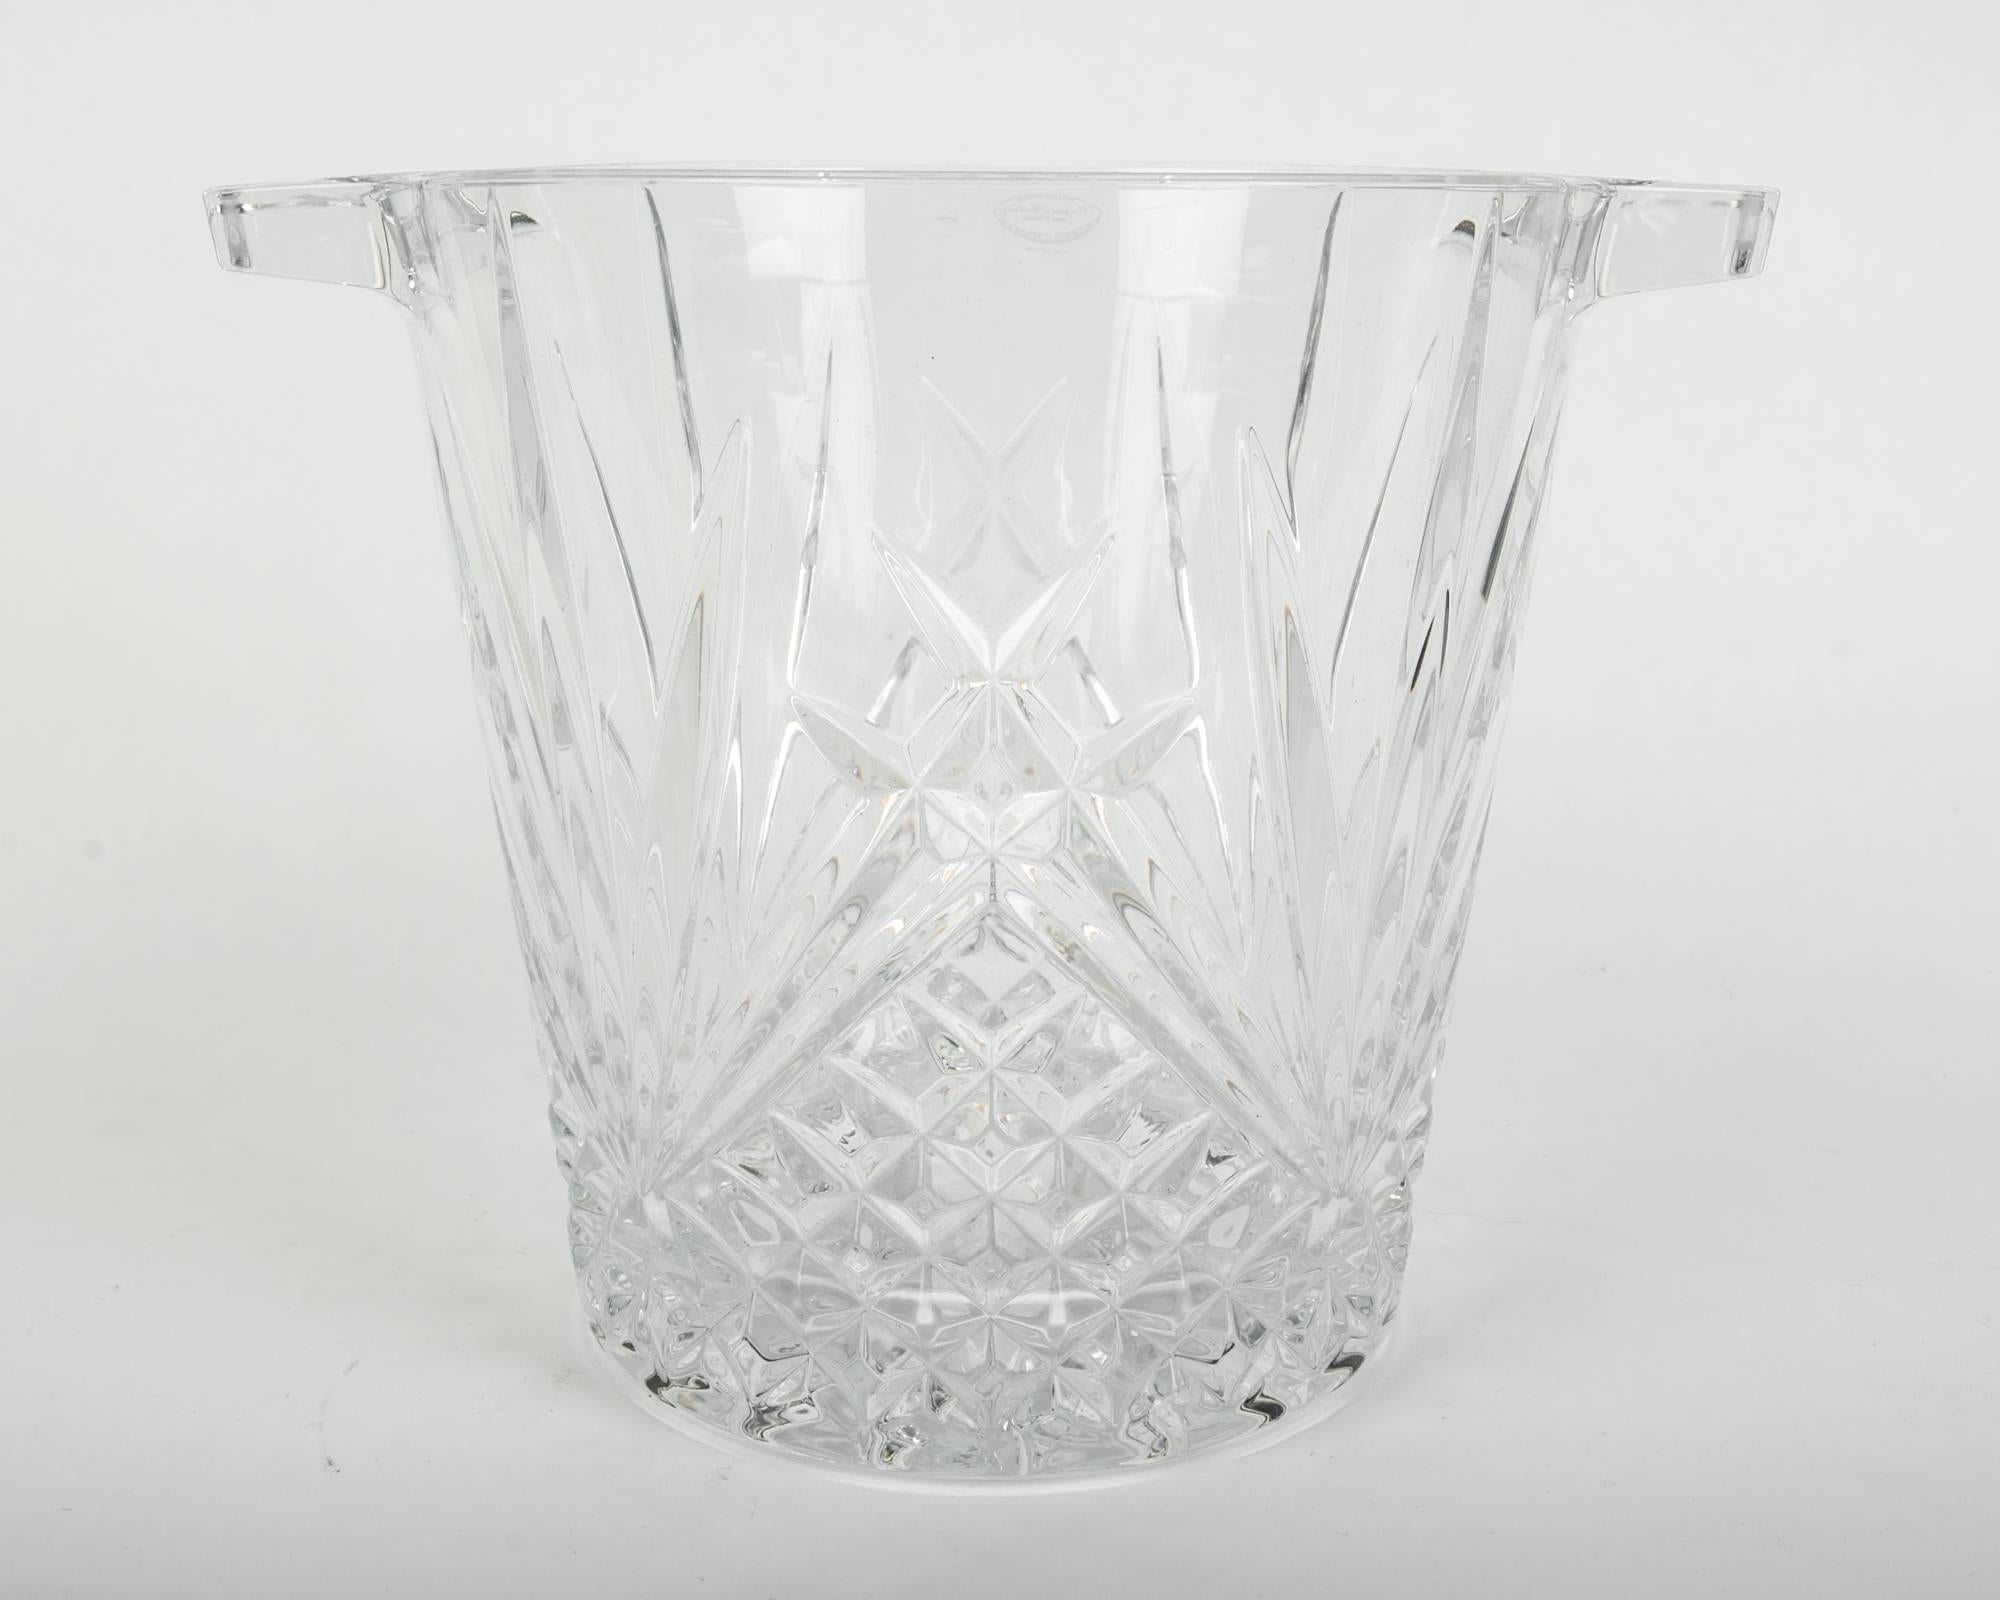 Vintage French cut crystal ice bucket / cooler. The ice bucket measure 8 inches high X 10 inches top diameter.